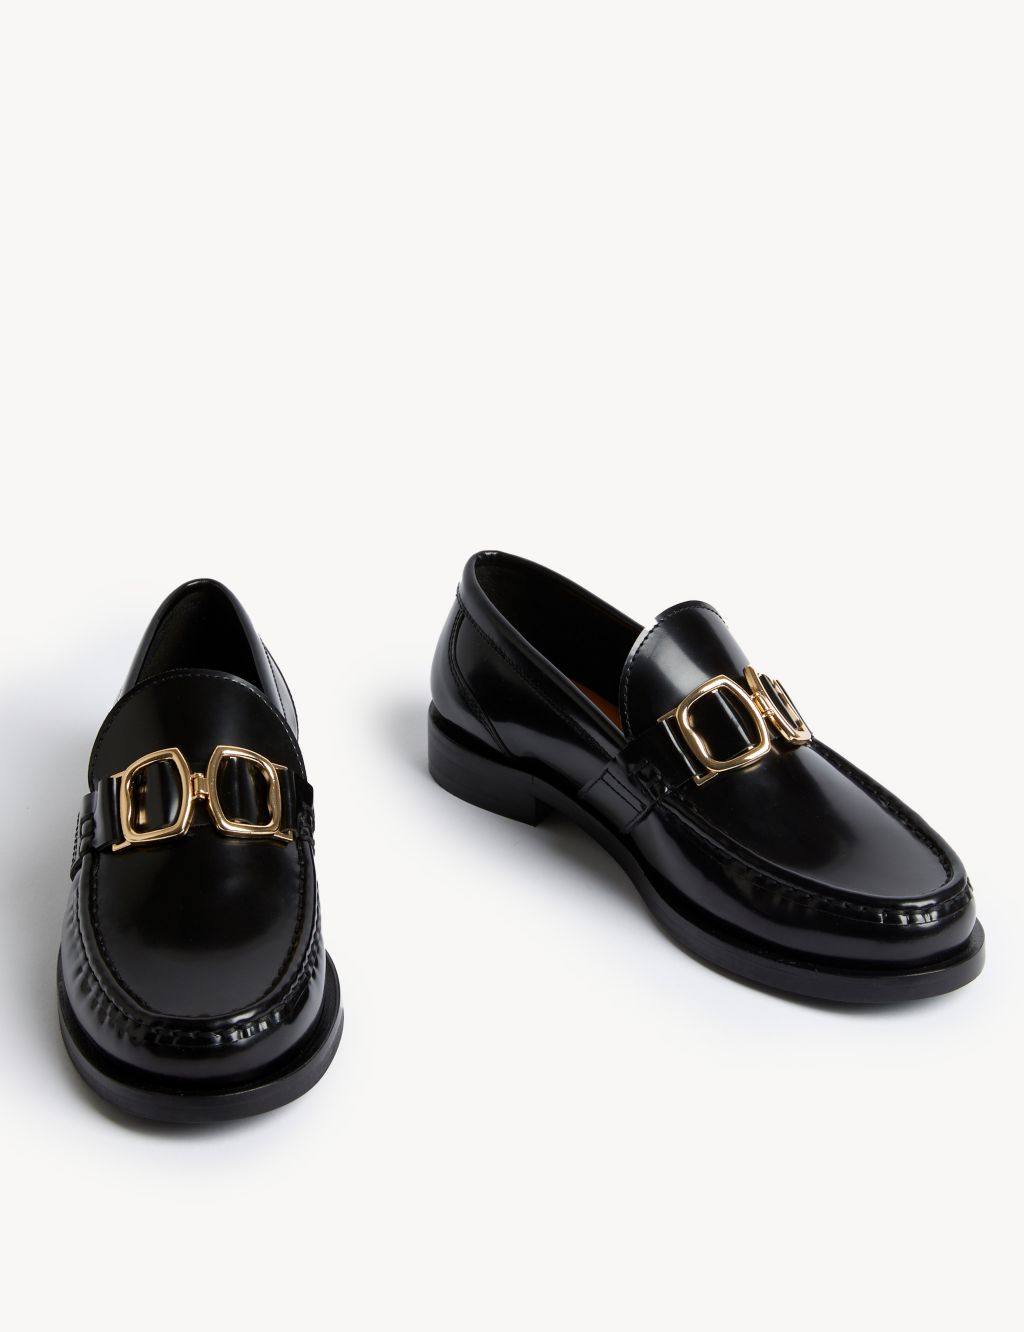 Leather Trim Flat Loafers image 2